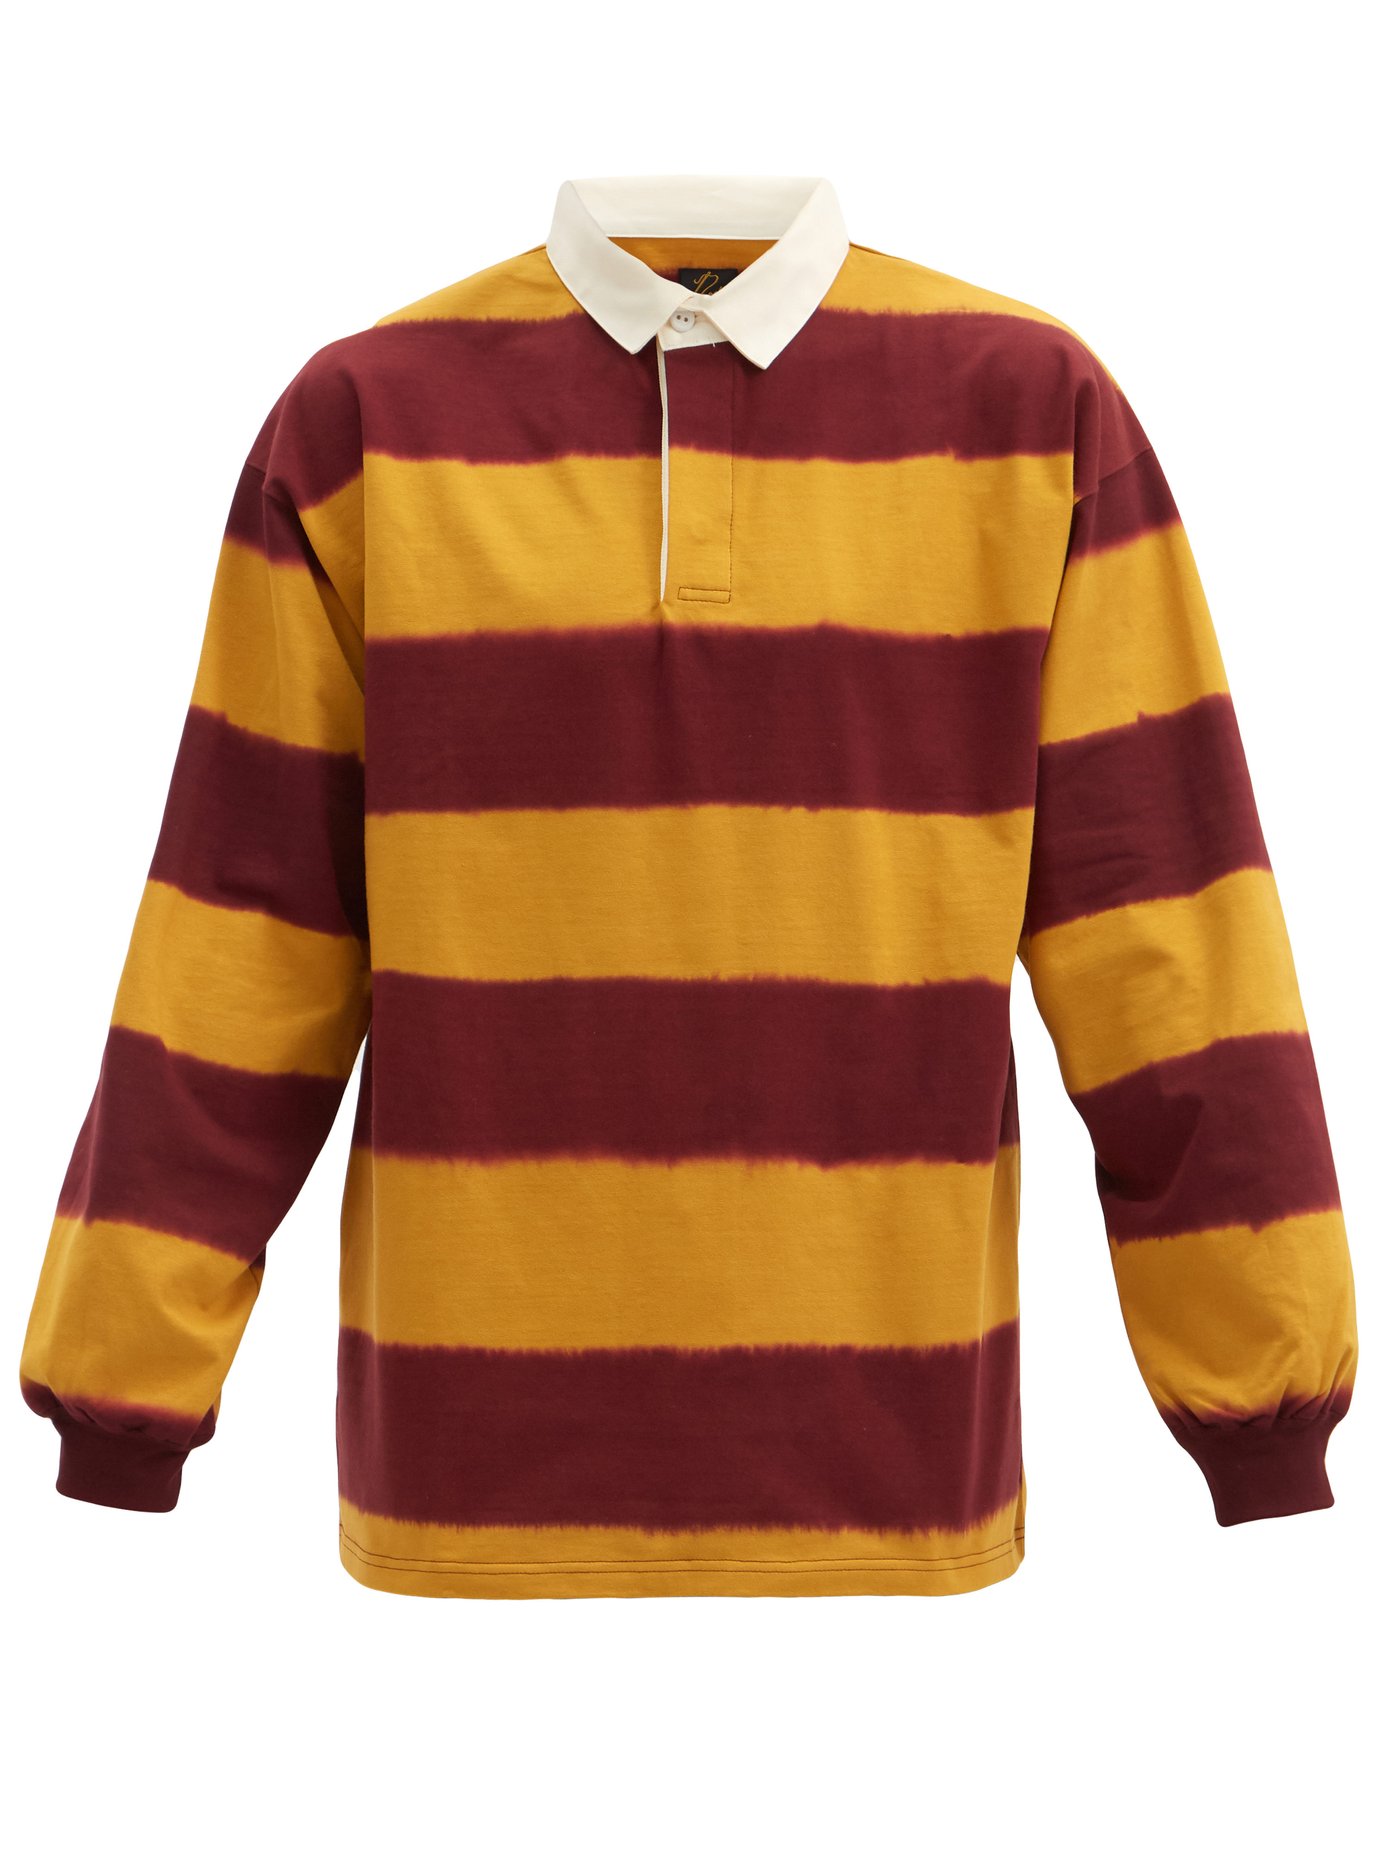 Tie-dye striped cotton rugby shirt 